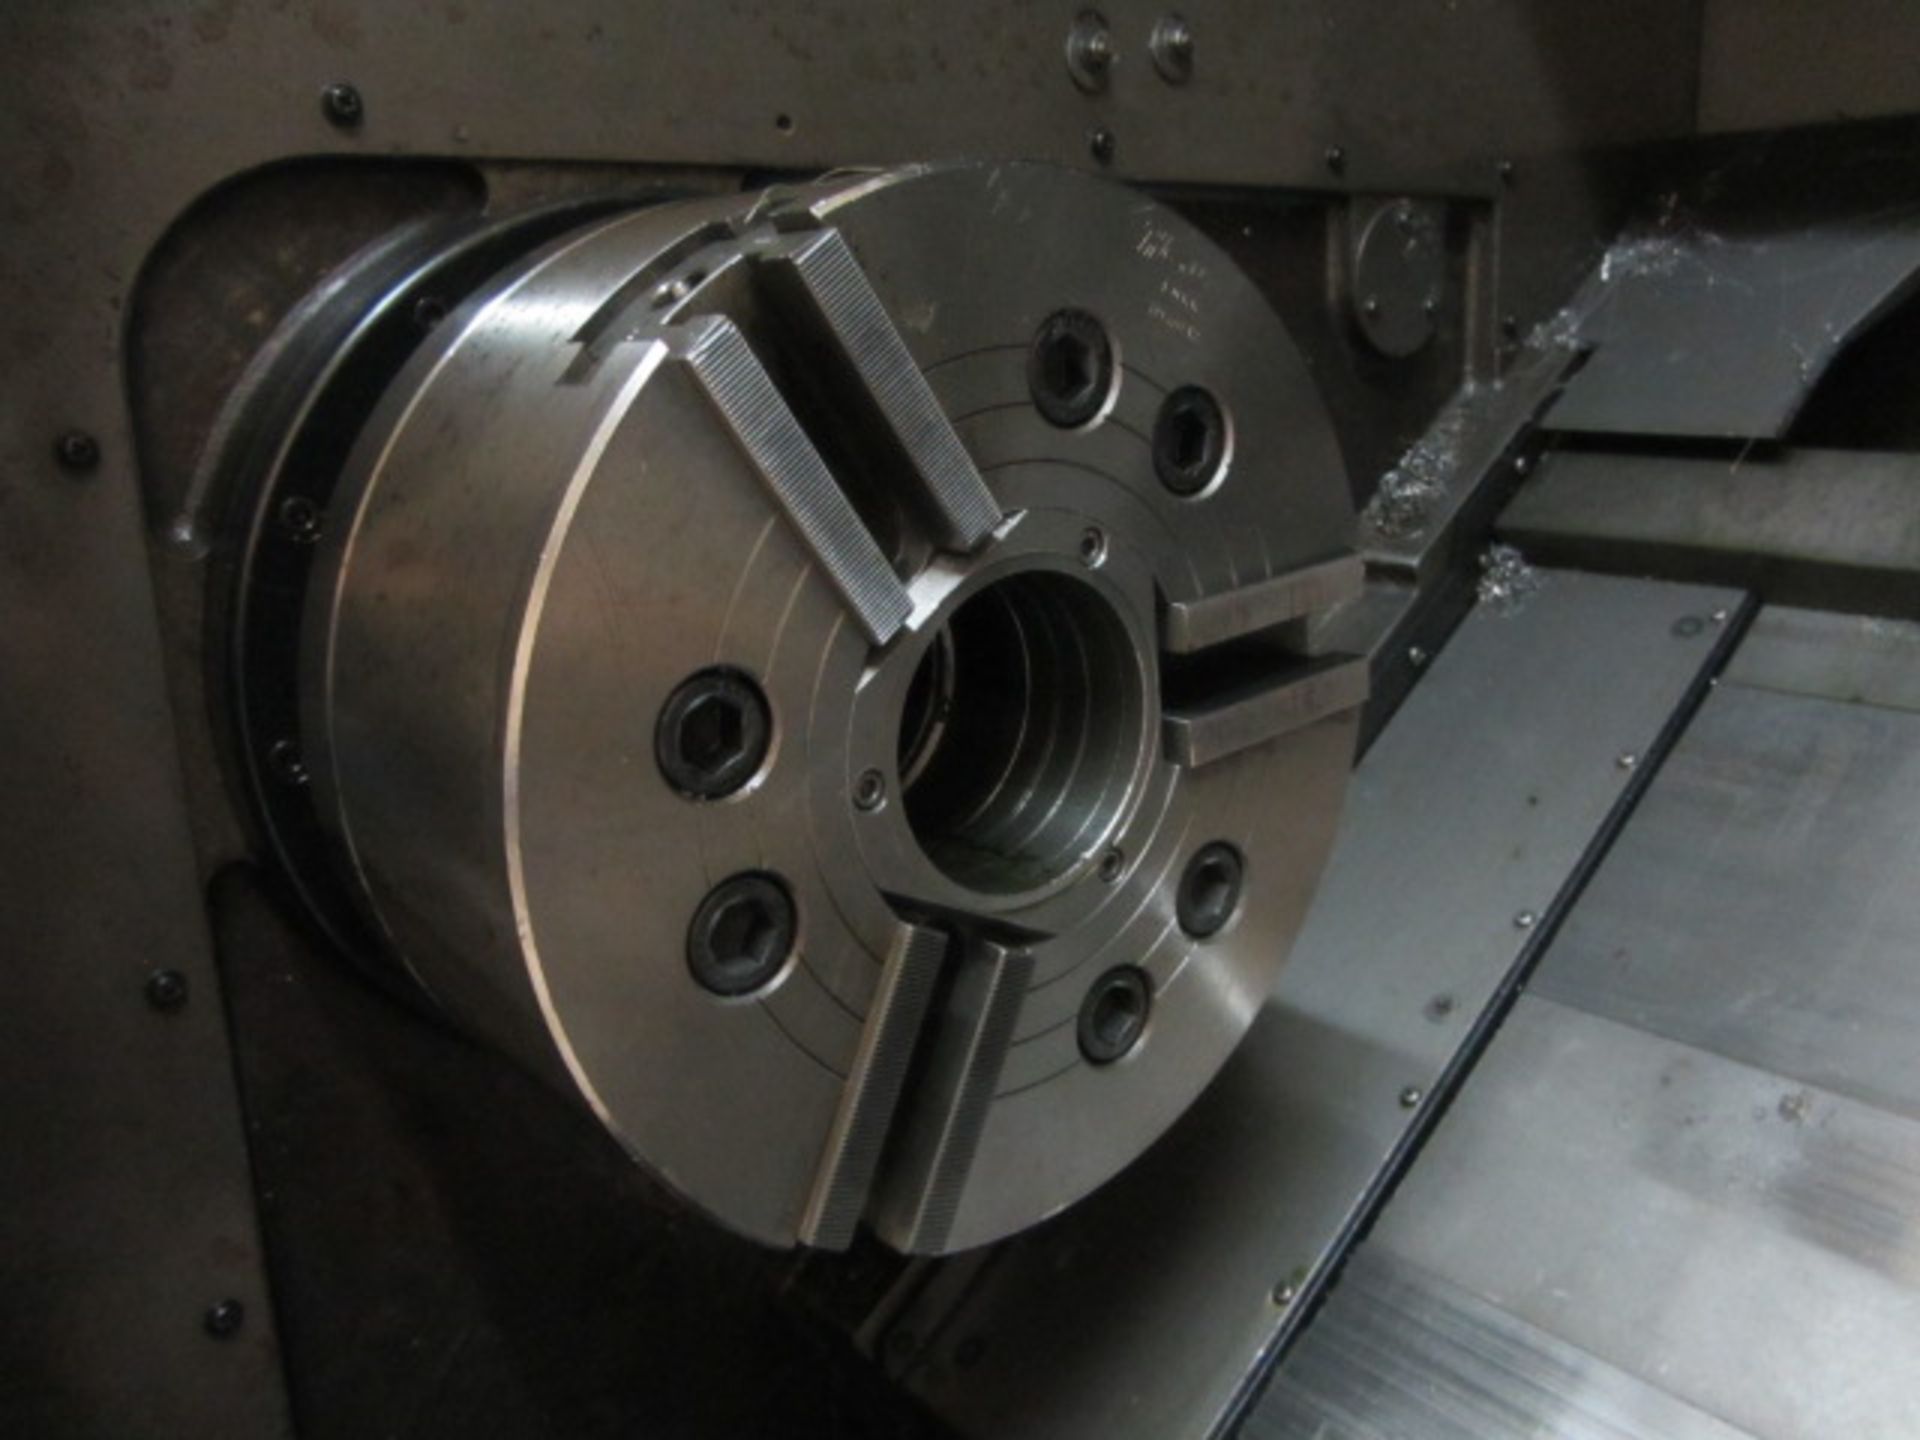 Mori Seiki SL-4 CNC Turning Center with 12'' 3-Jaw Power Chuck, 30'' Max Distance to Tailstock, - Image 6 of 10